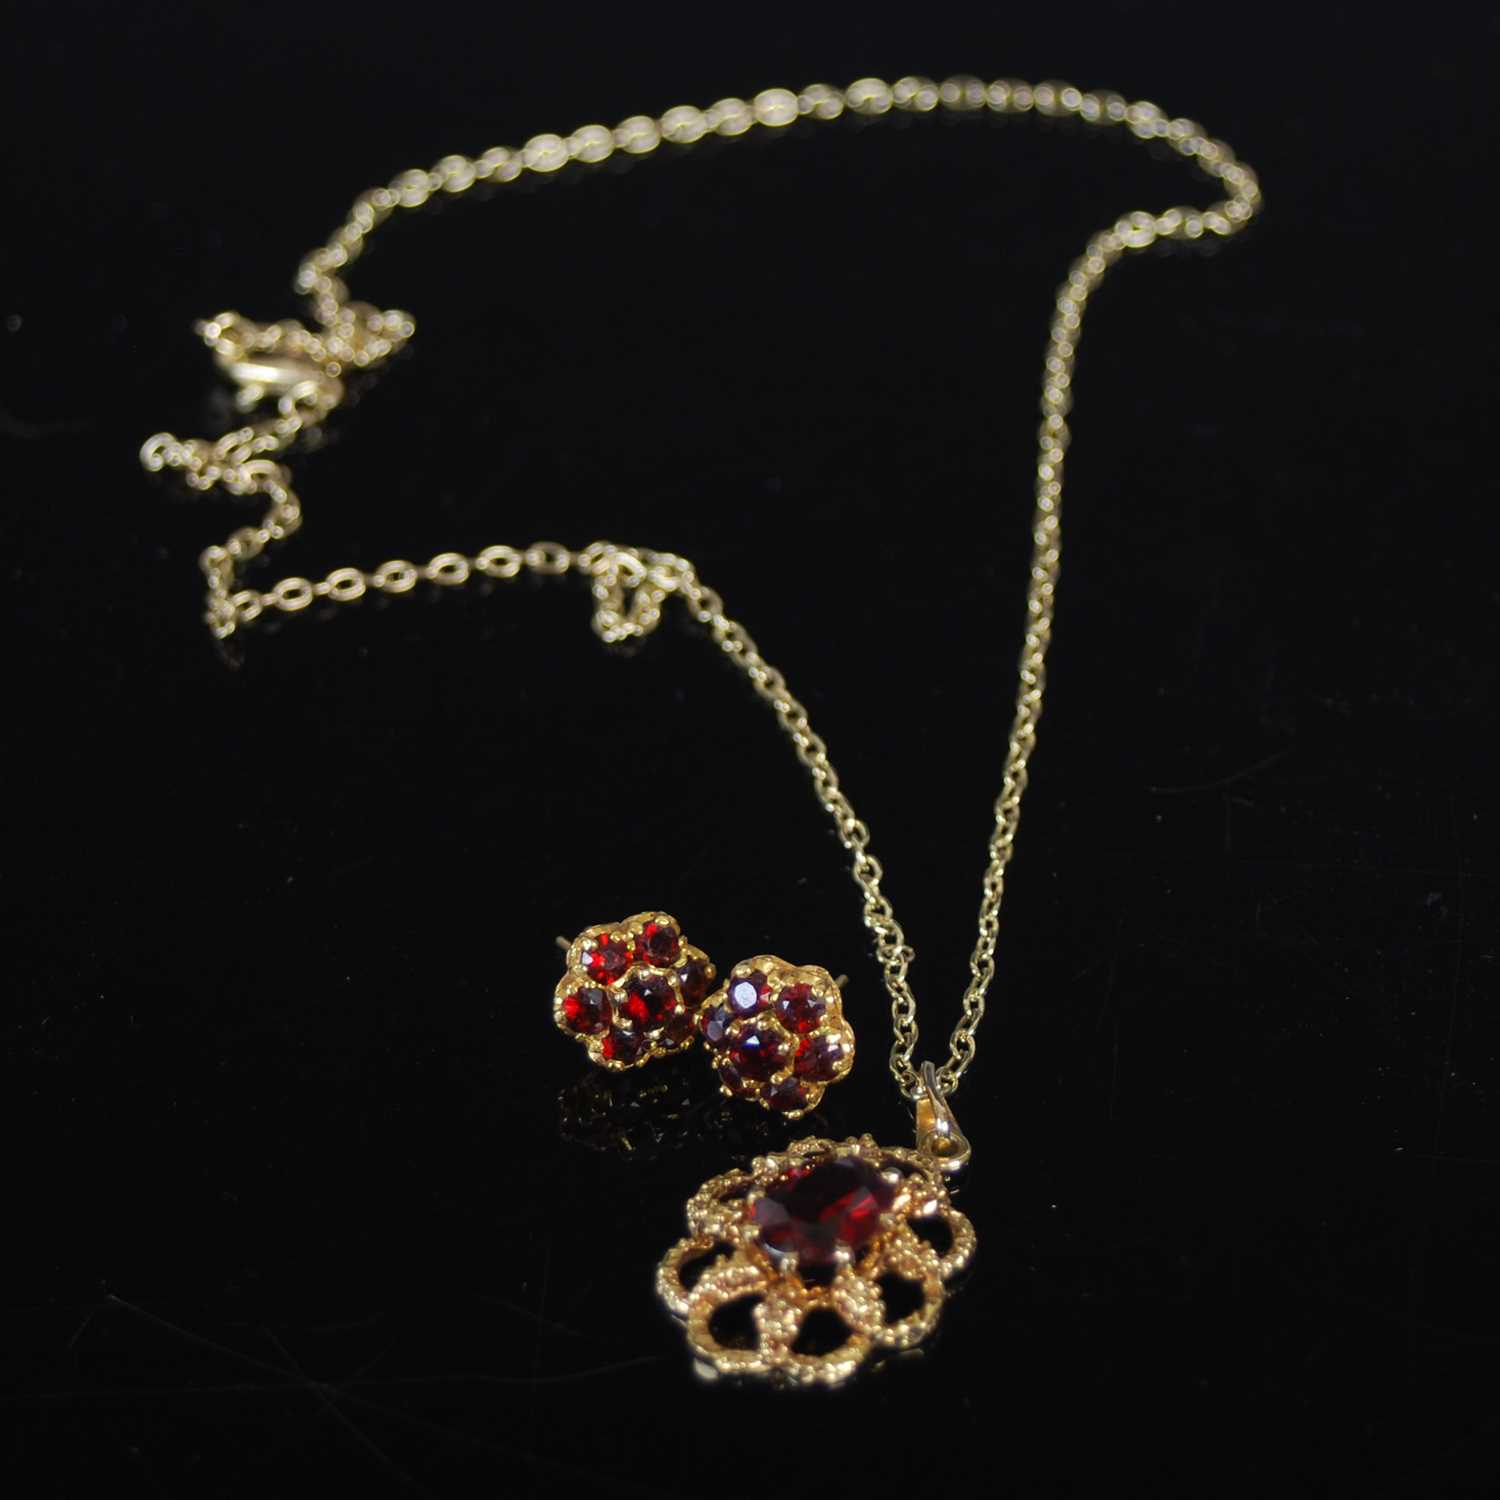 A 9ct gold and garnet set pendant suspended on a gold-plated necklace, together with a pair of 9ct